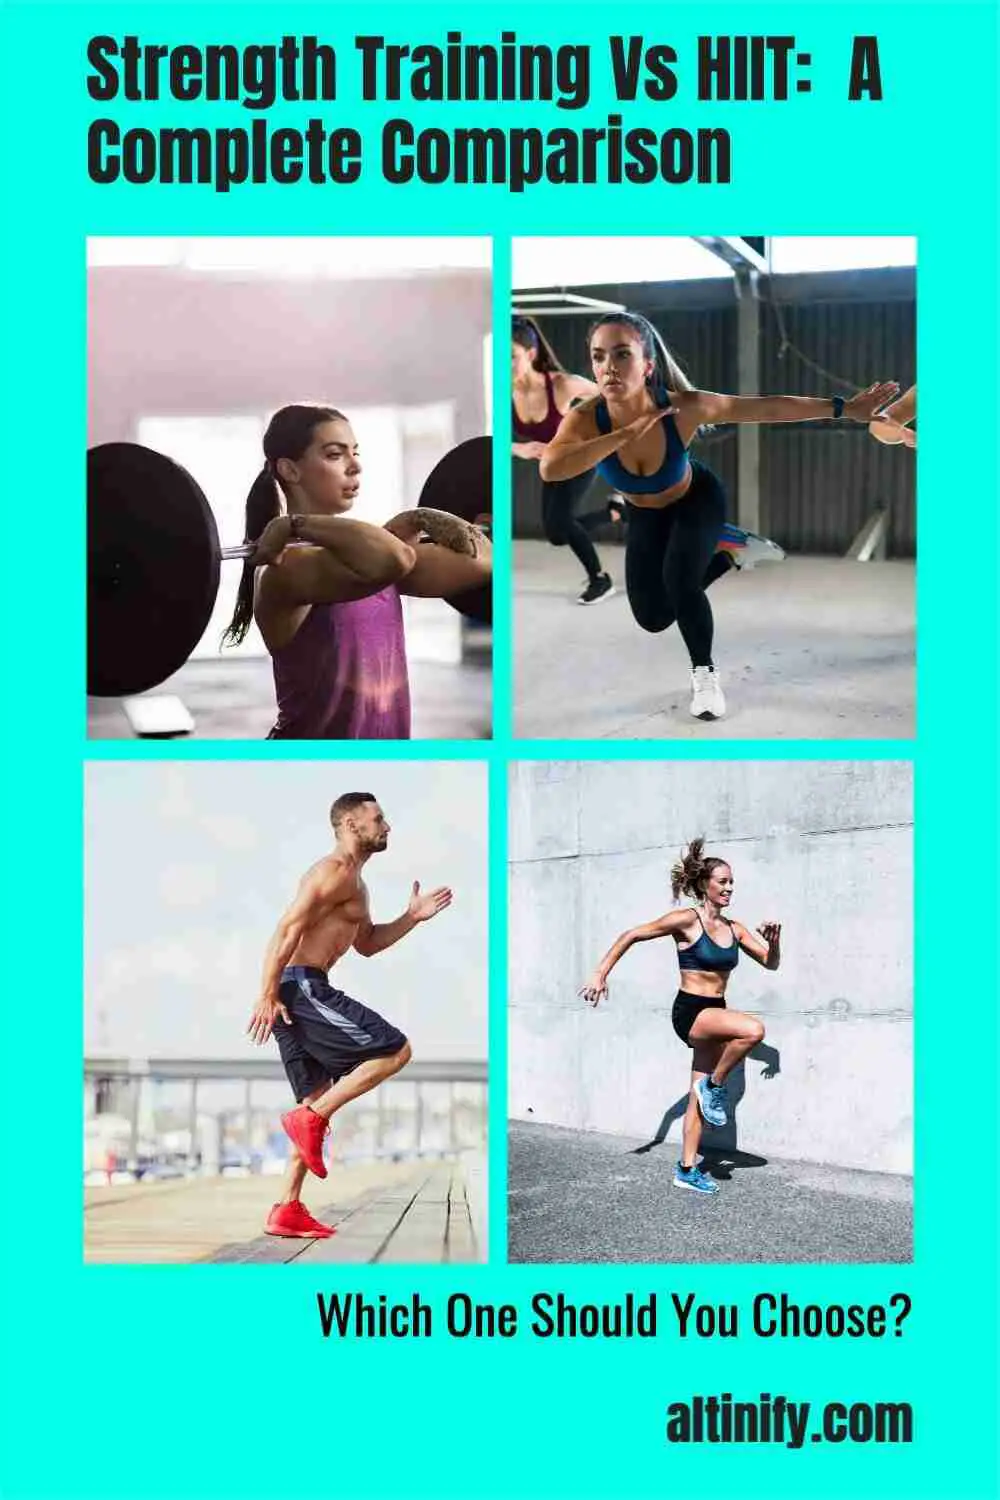 Strength Training Vs HIIT:  A Complete Comparison